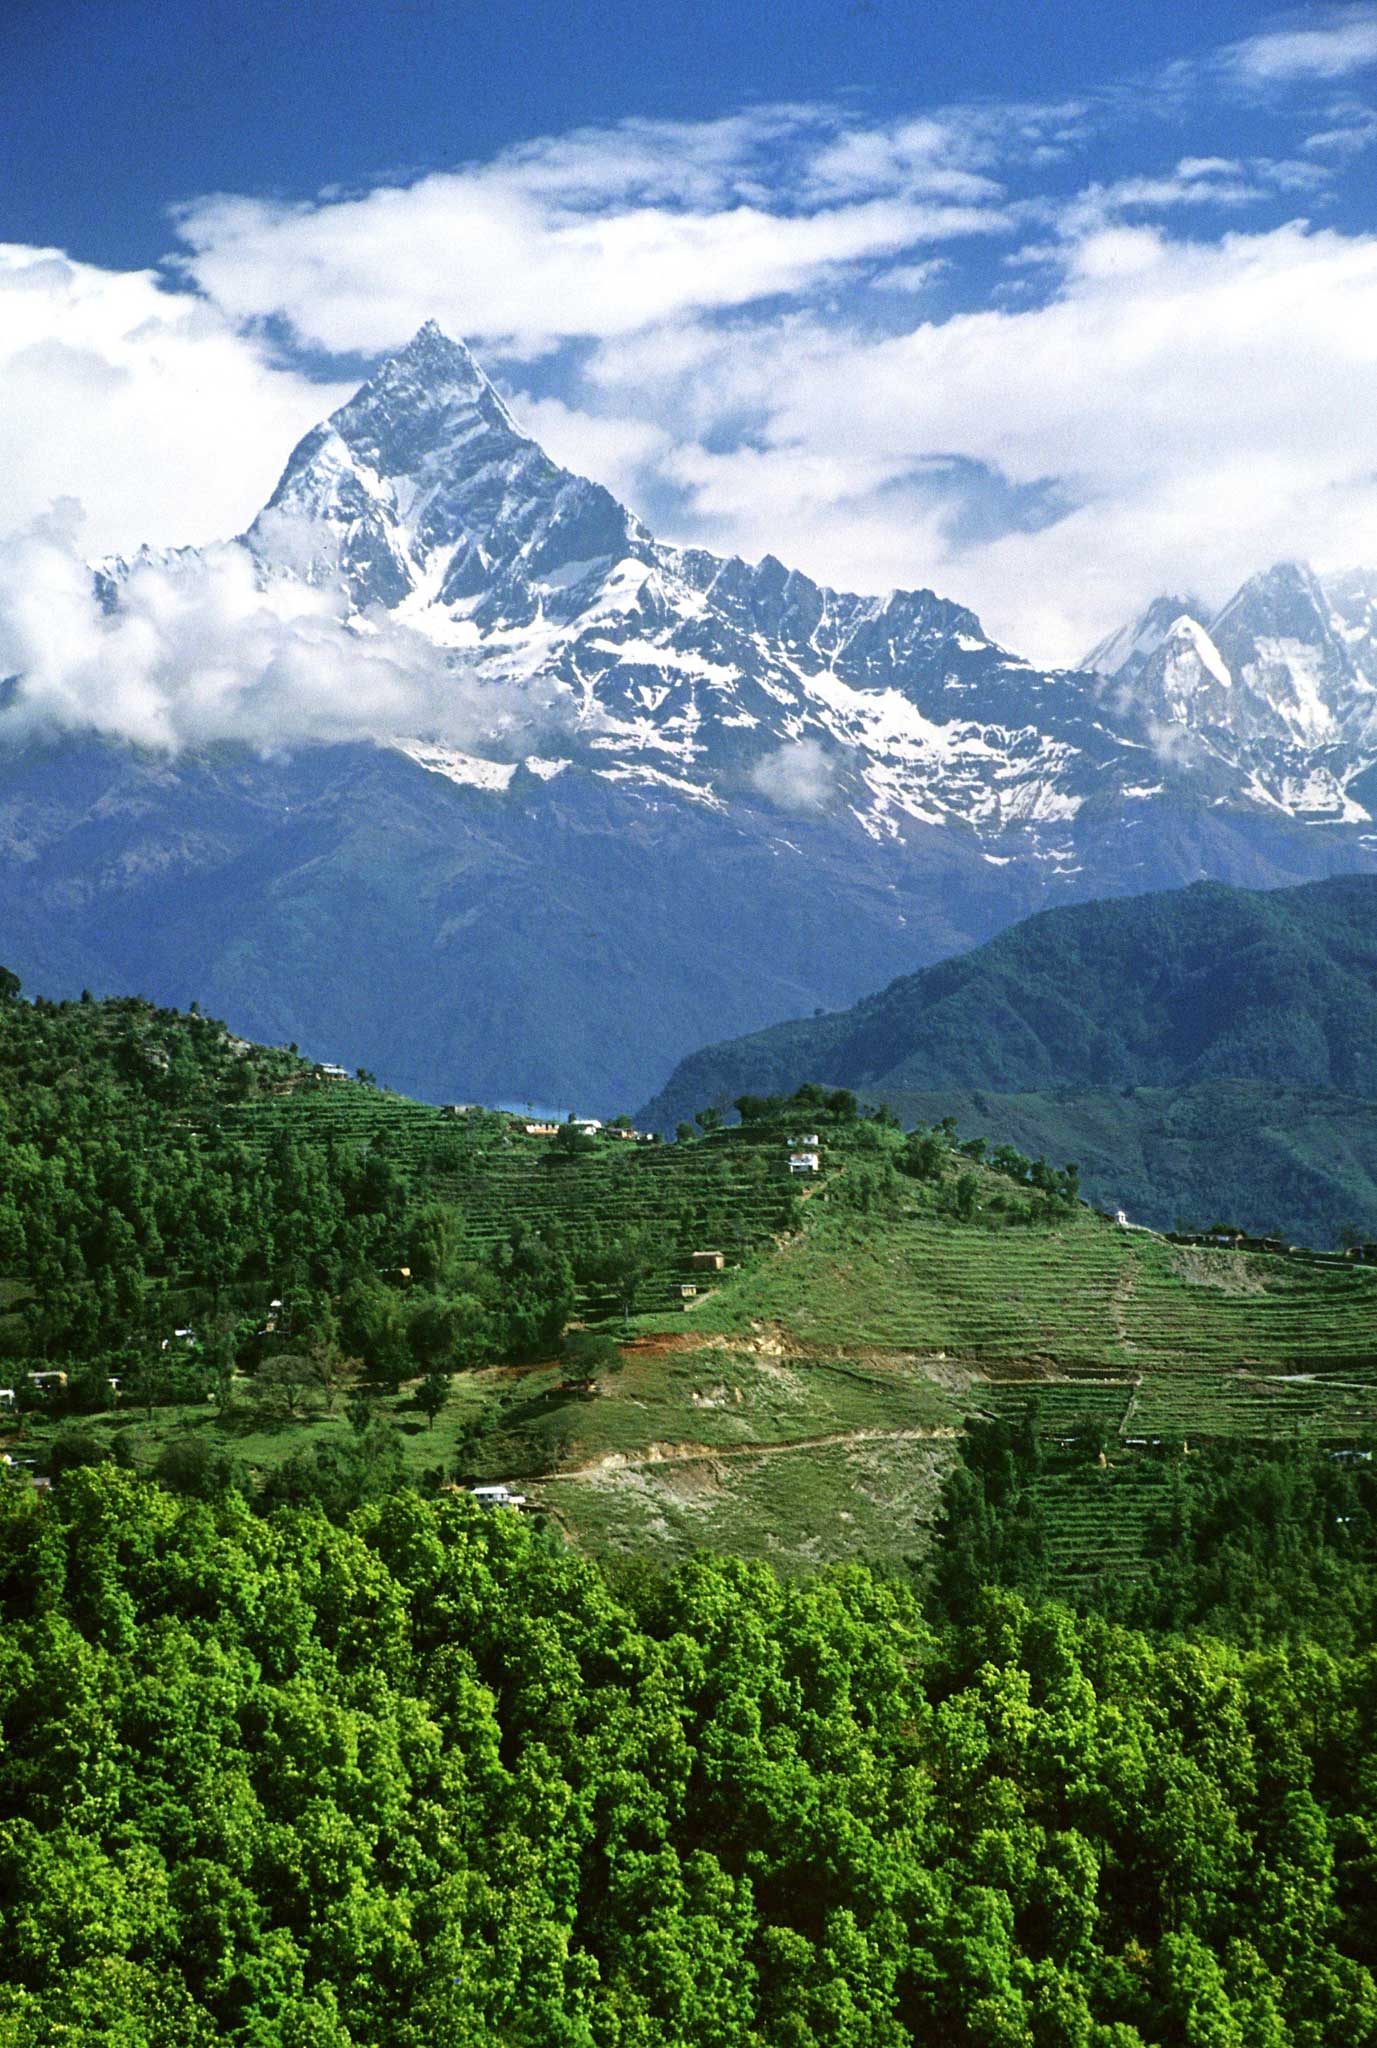 Khangchendzonga is the third-highest mountain in the world, and sacred to the Buddhists